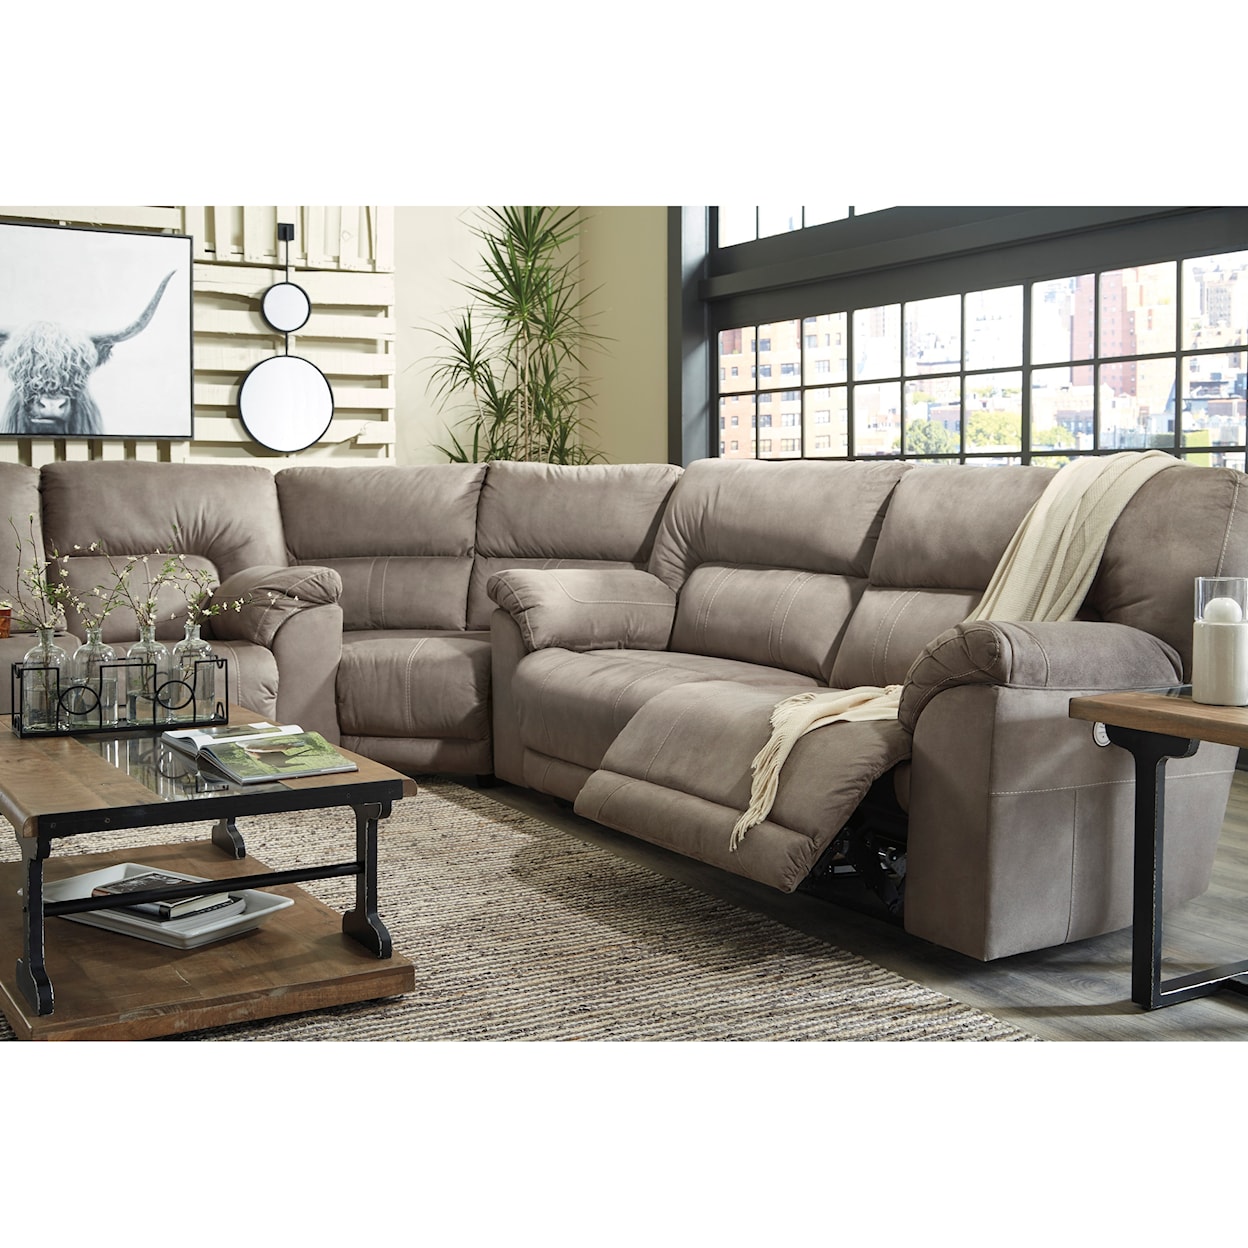 Benchcraft Cavalcade Power Reclining Sectional